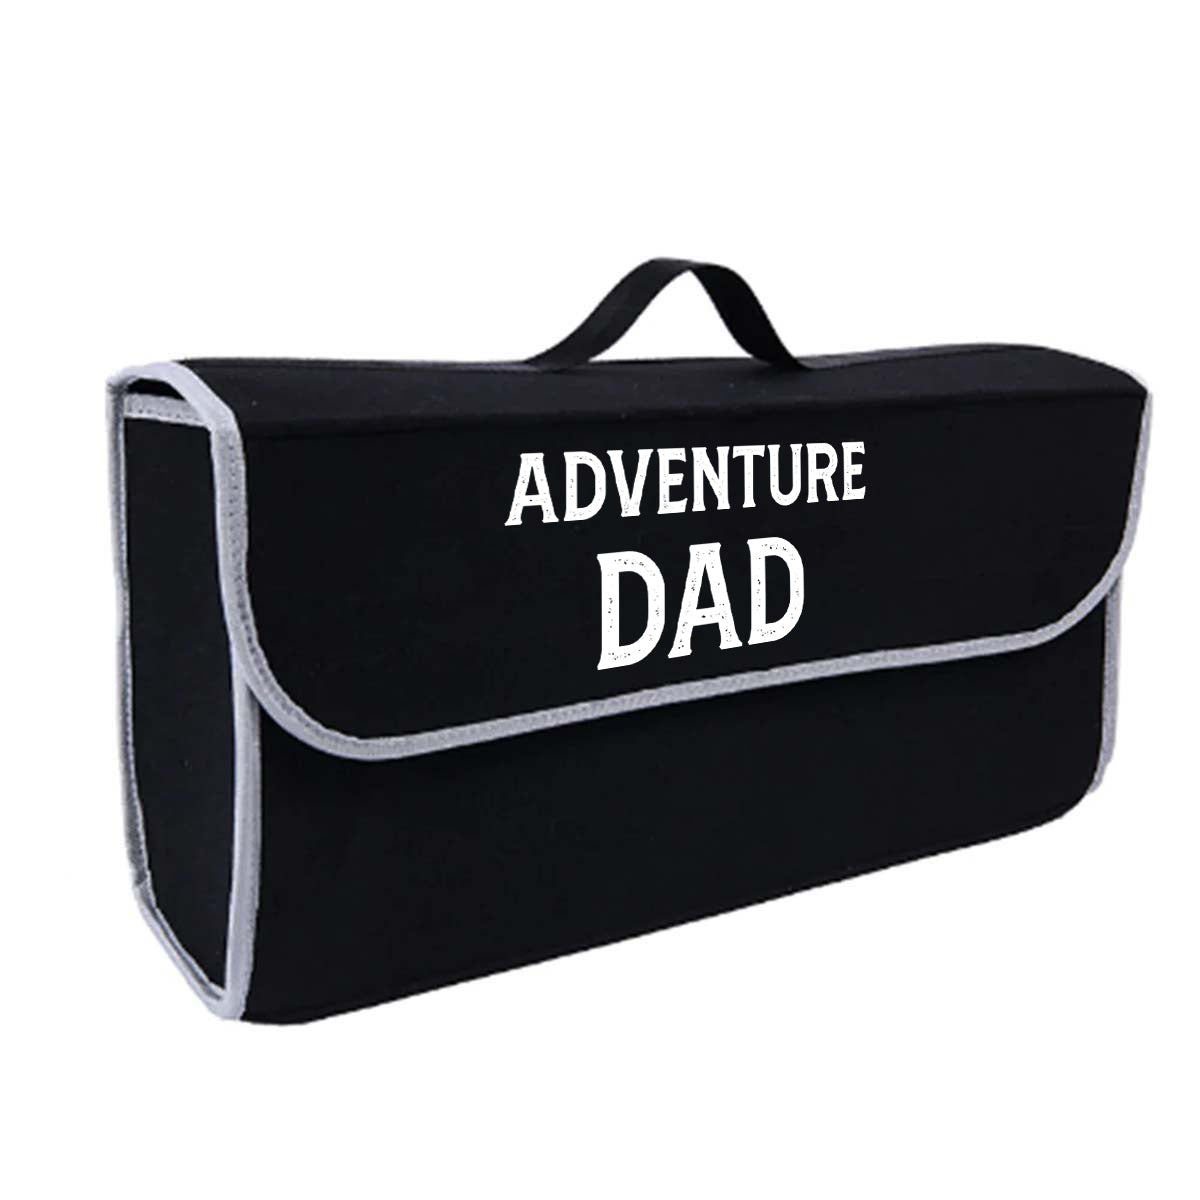 Delicate Leather Soft Felt Car Bag Organizer Folding Car Storage Box Non Slip Fireproof Car Trunk Organizer, Custom For Your Cars, Happy Father' s Day, Adventure Dad, Car Accessories CC12990, Gift for Daddy 04